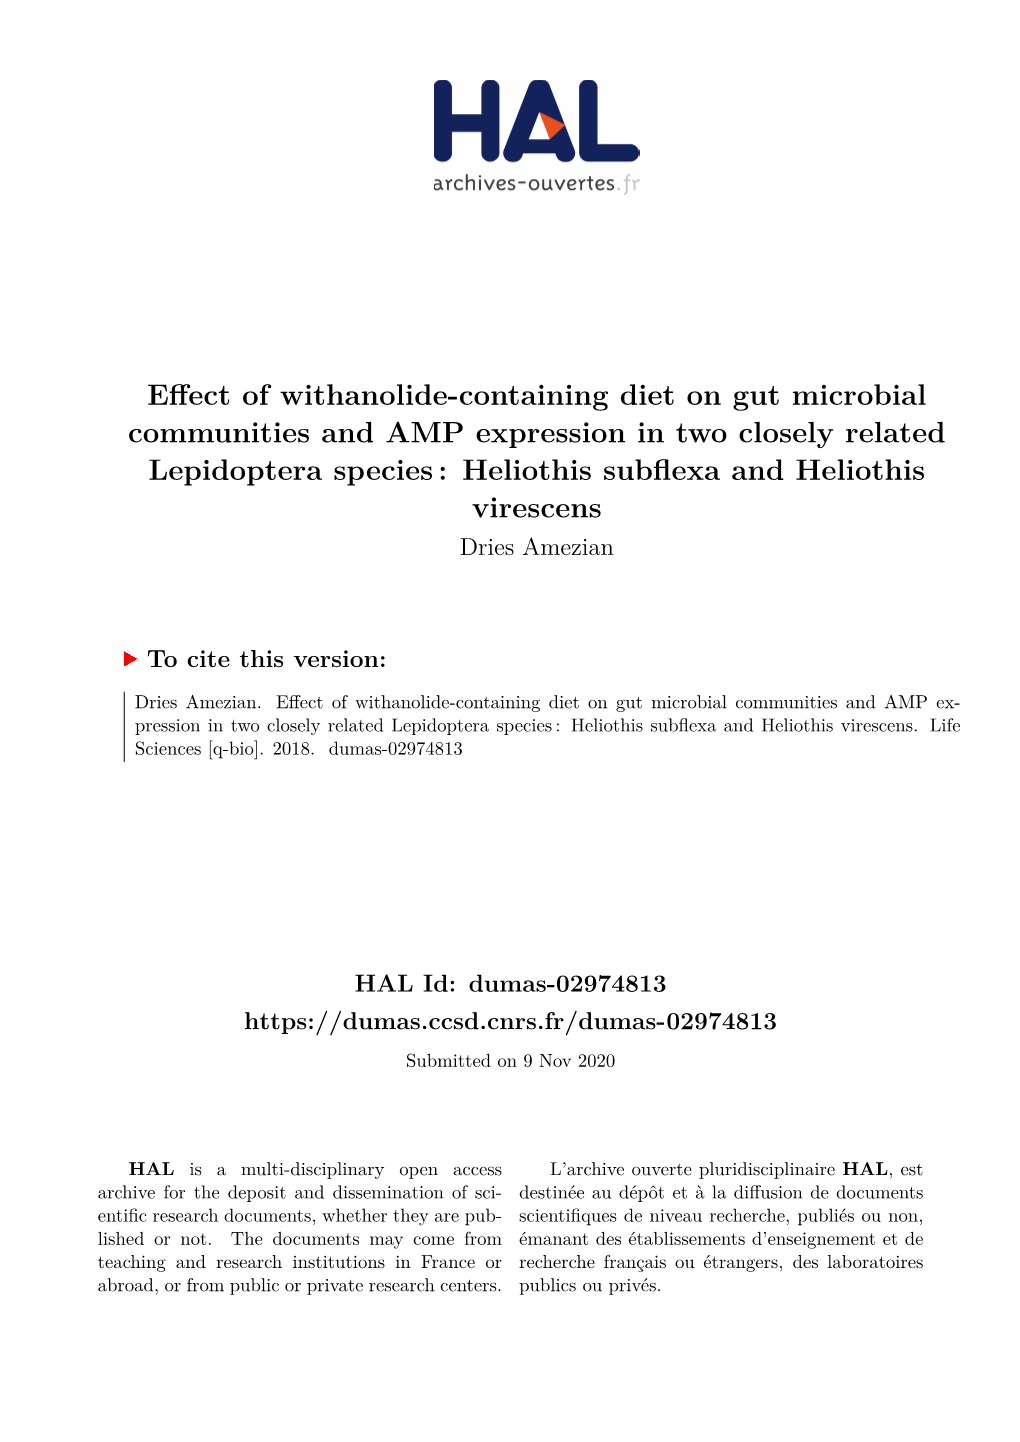 Effect of Withanolide-Containing Diet on Gut Microbial Communities And